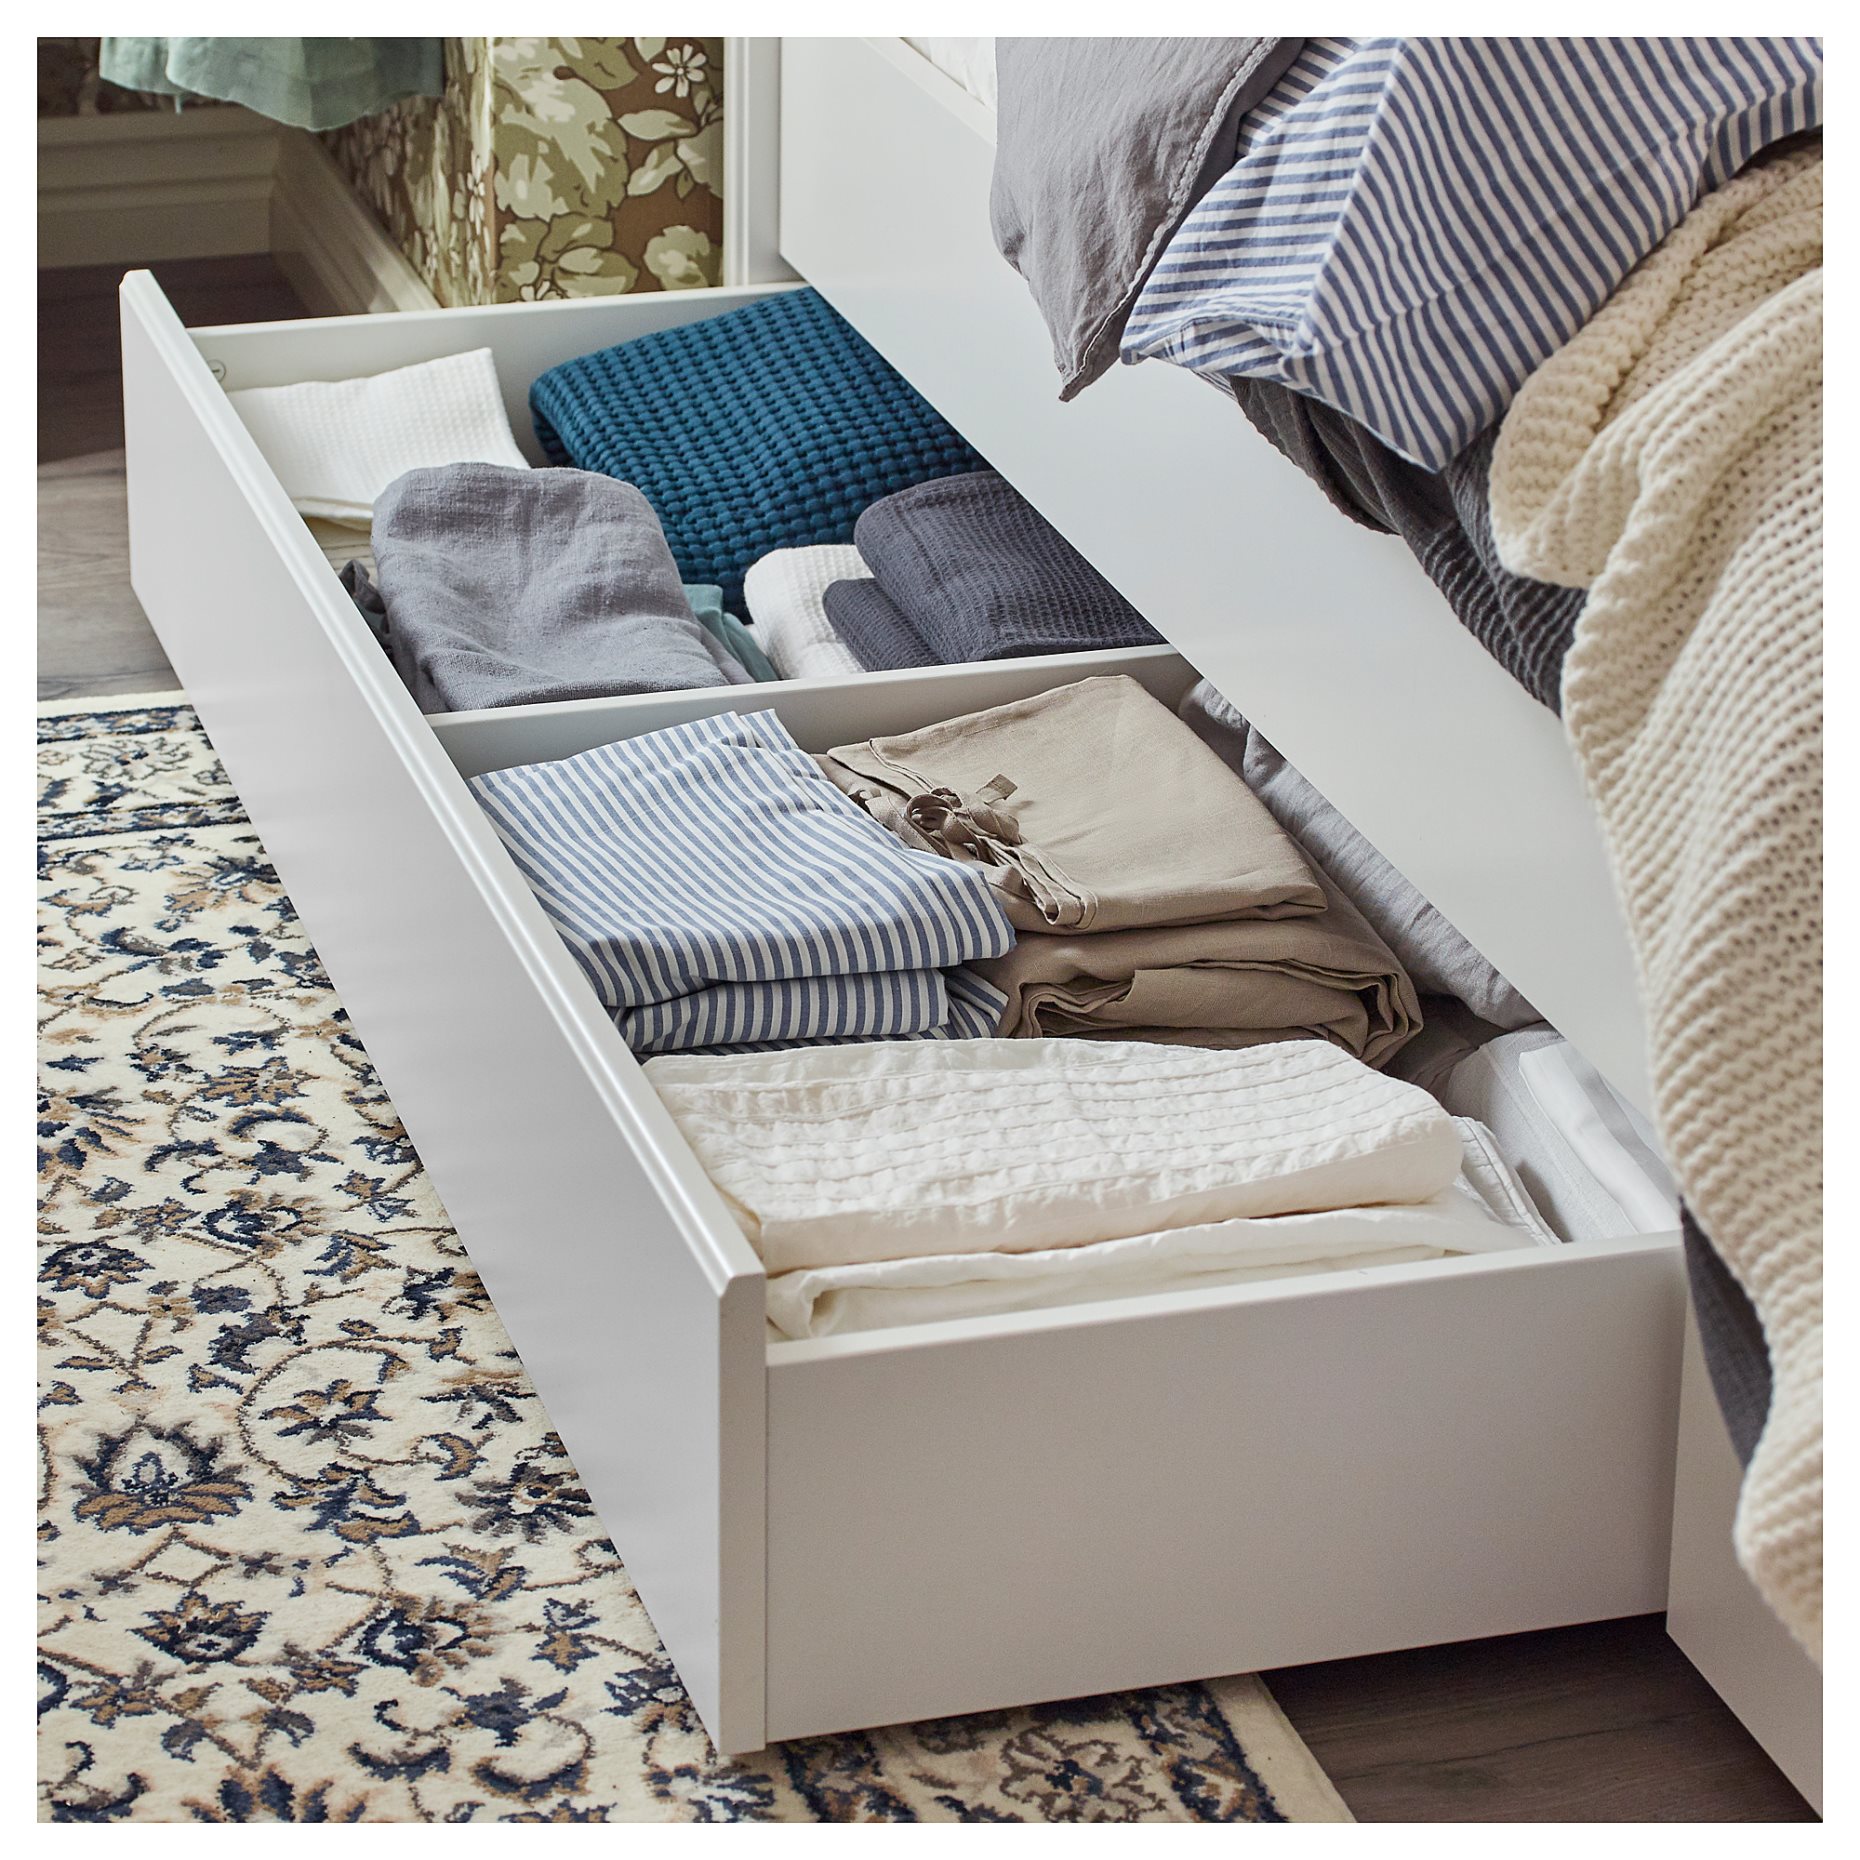 SONGESAND, bed frame with 2 storage boxes, 160X200 cm, 892.412.56